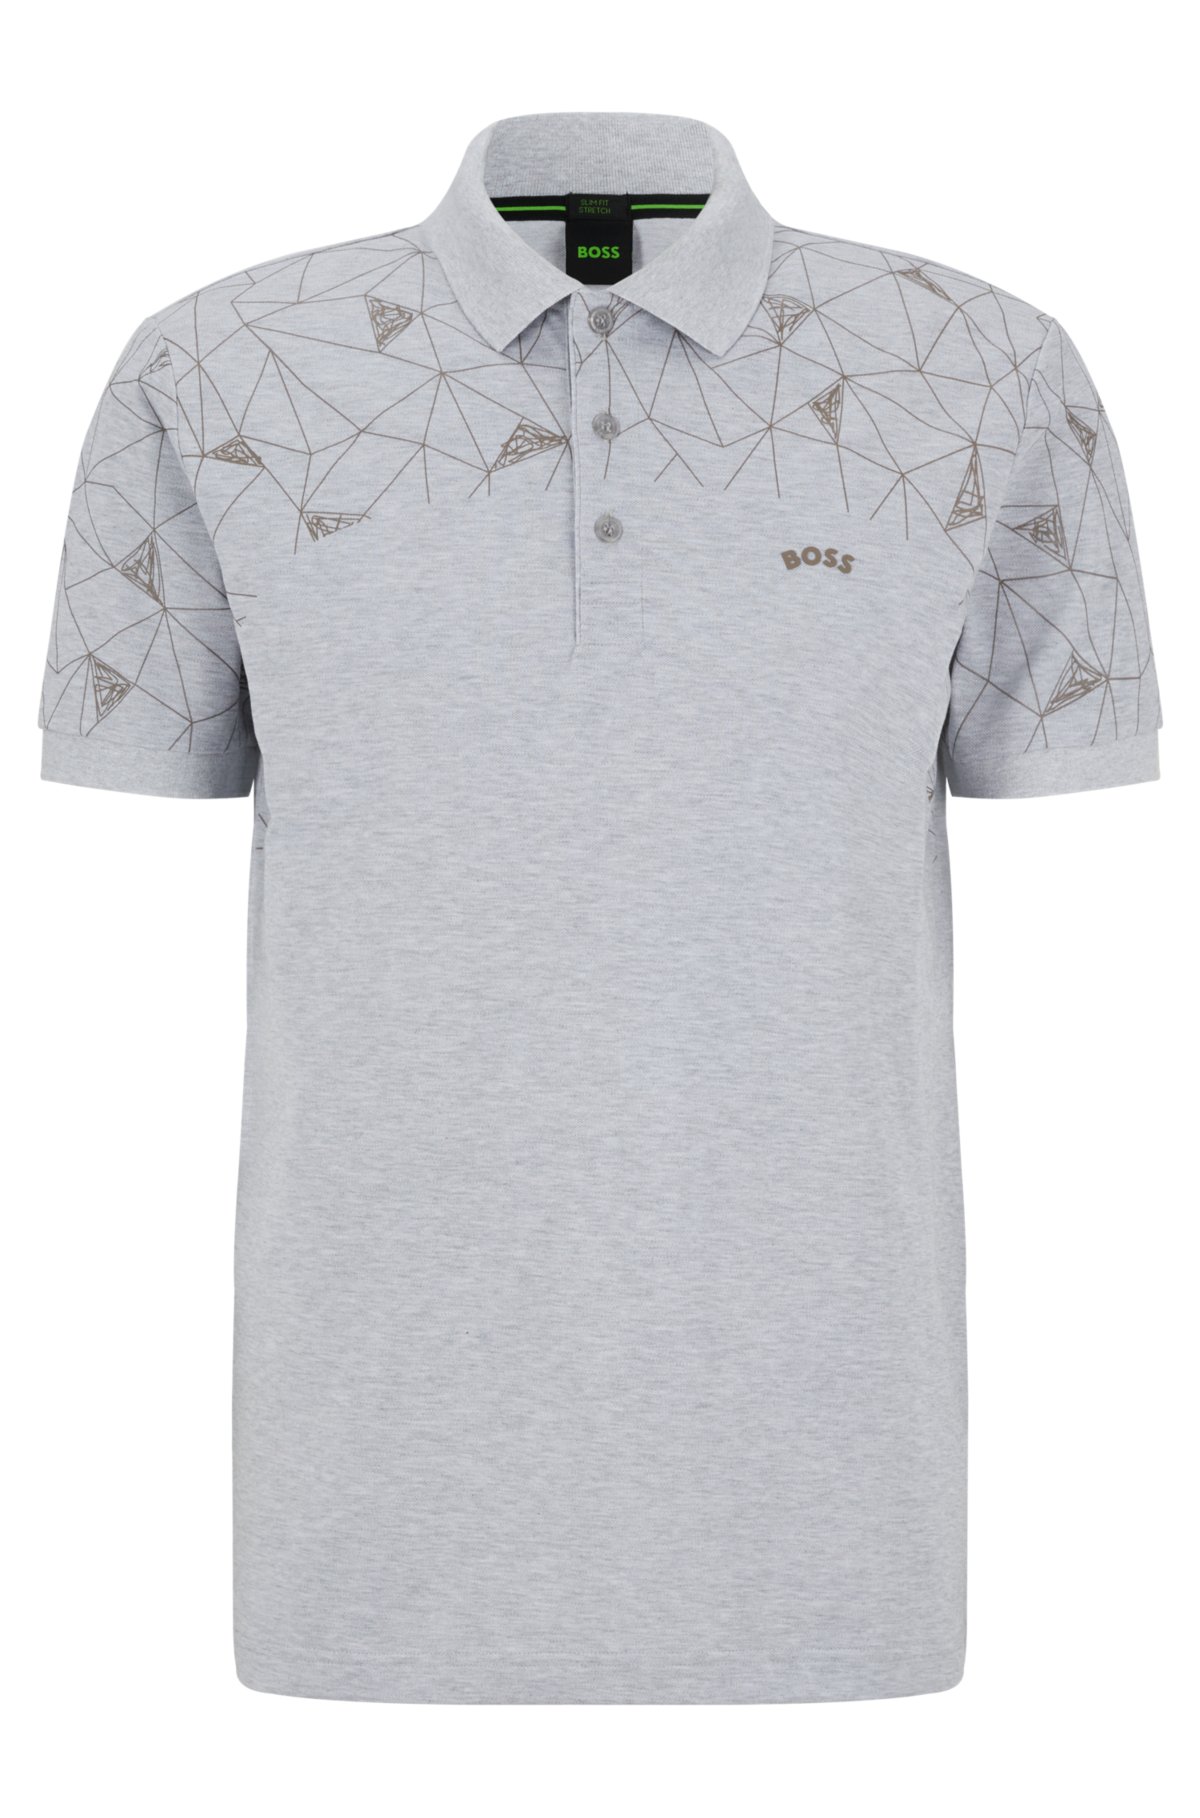 BOSS - Cotton-blend polo artwork grid shirt with slim-fit